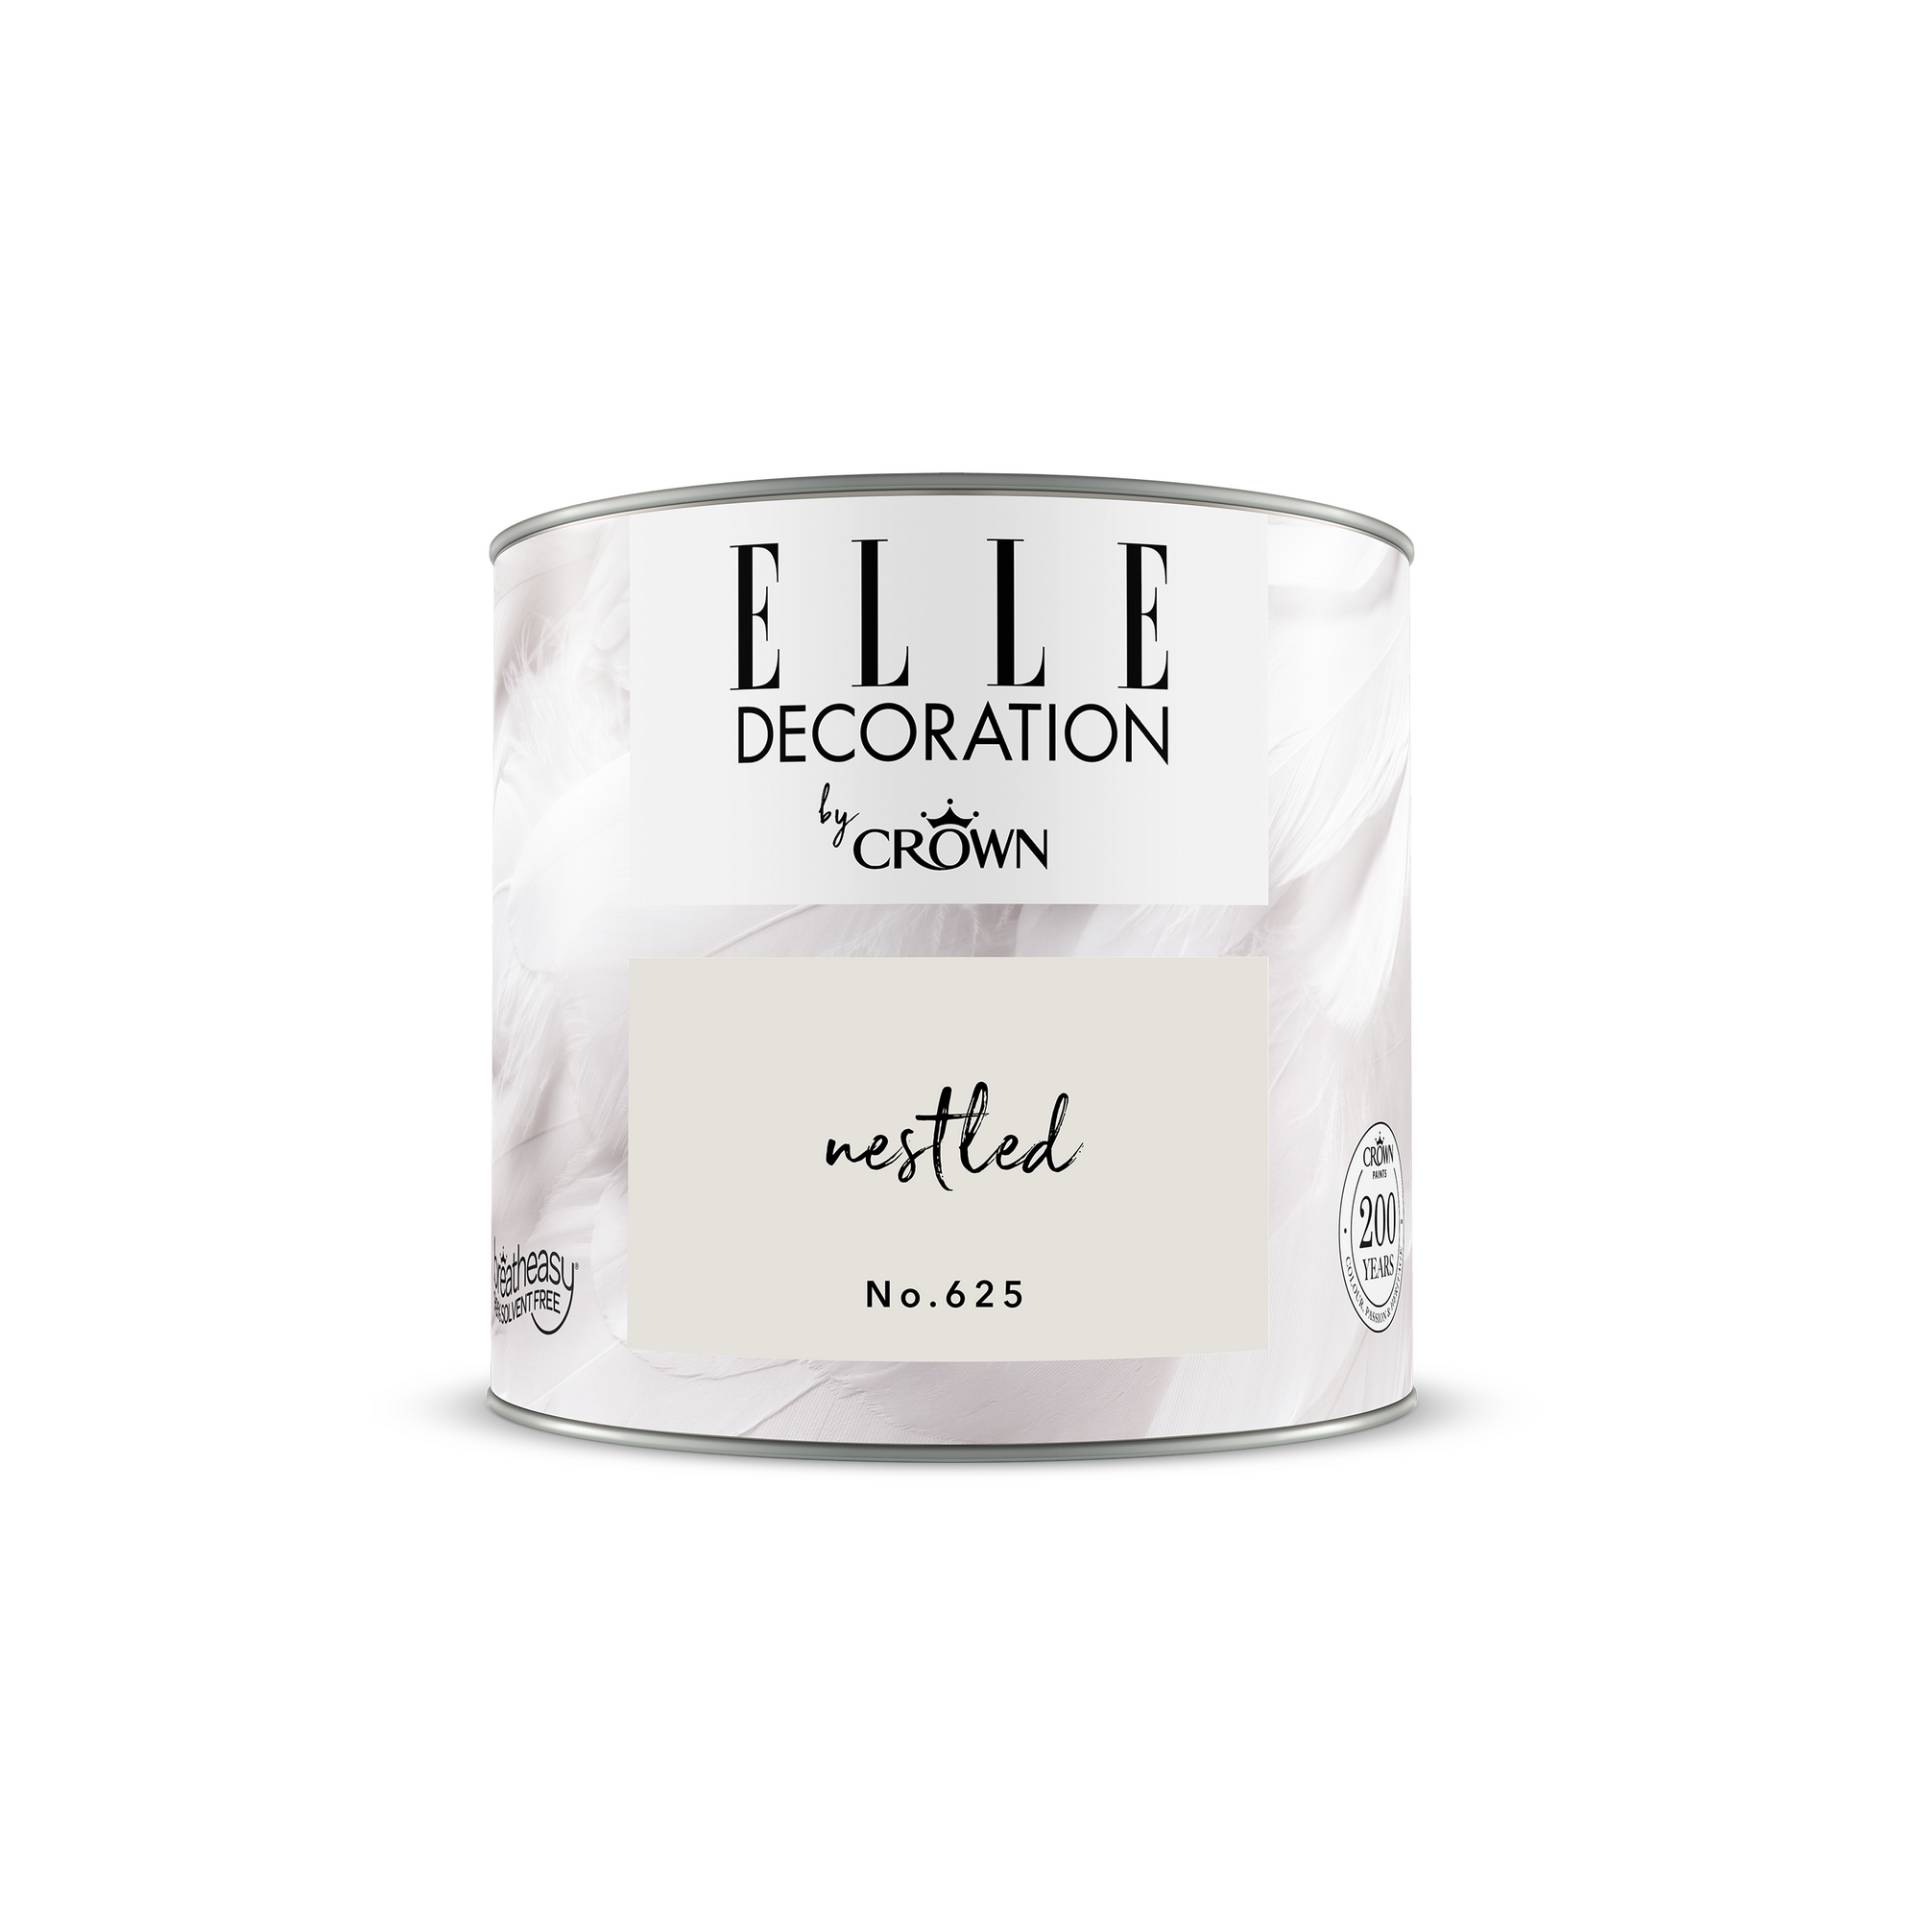 ELLE Decoration by Crown Wandfarbe 'Nestled No. 625 ' grauweiß matt 125 ml von ELLE Decoration by Crown